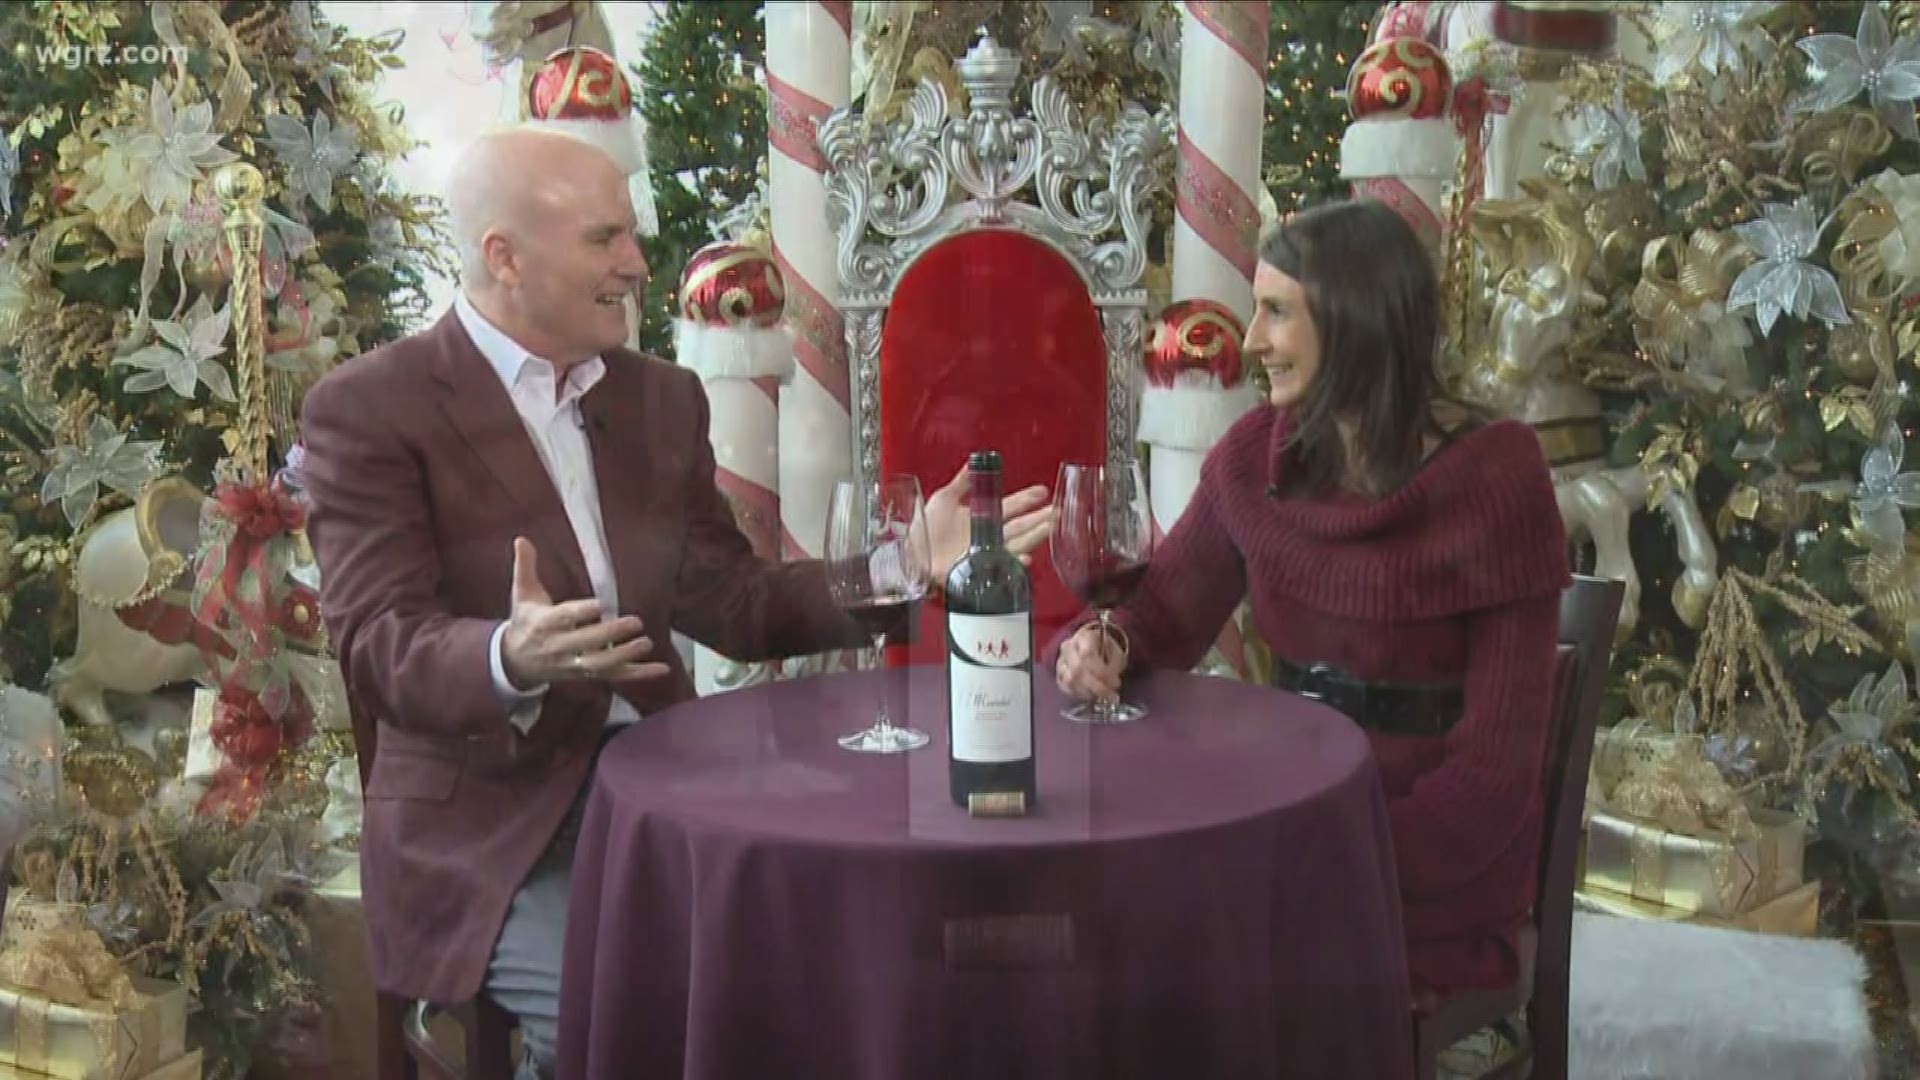 Spiel The Wine - December 14 - Segment 4 (THIS VIDEO IS SPONSORED BY The Global Group)